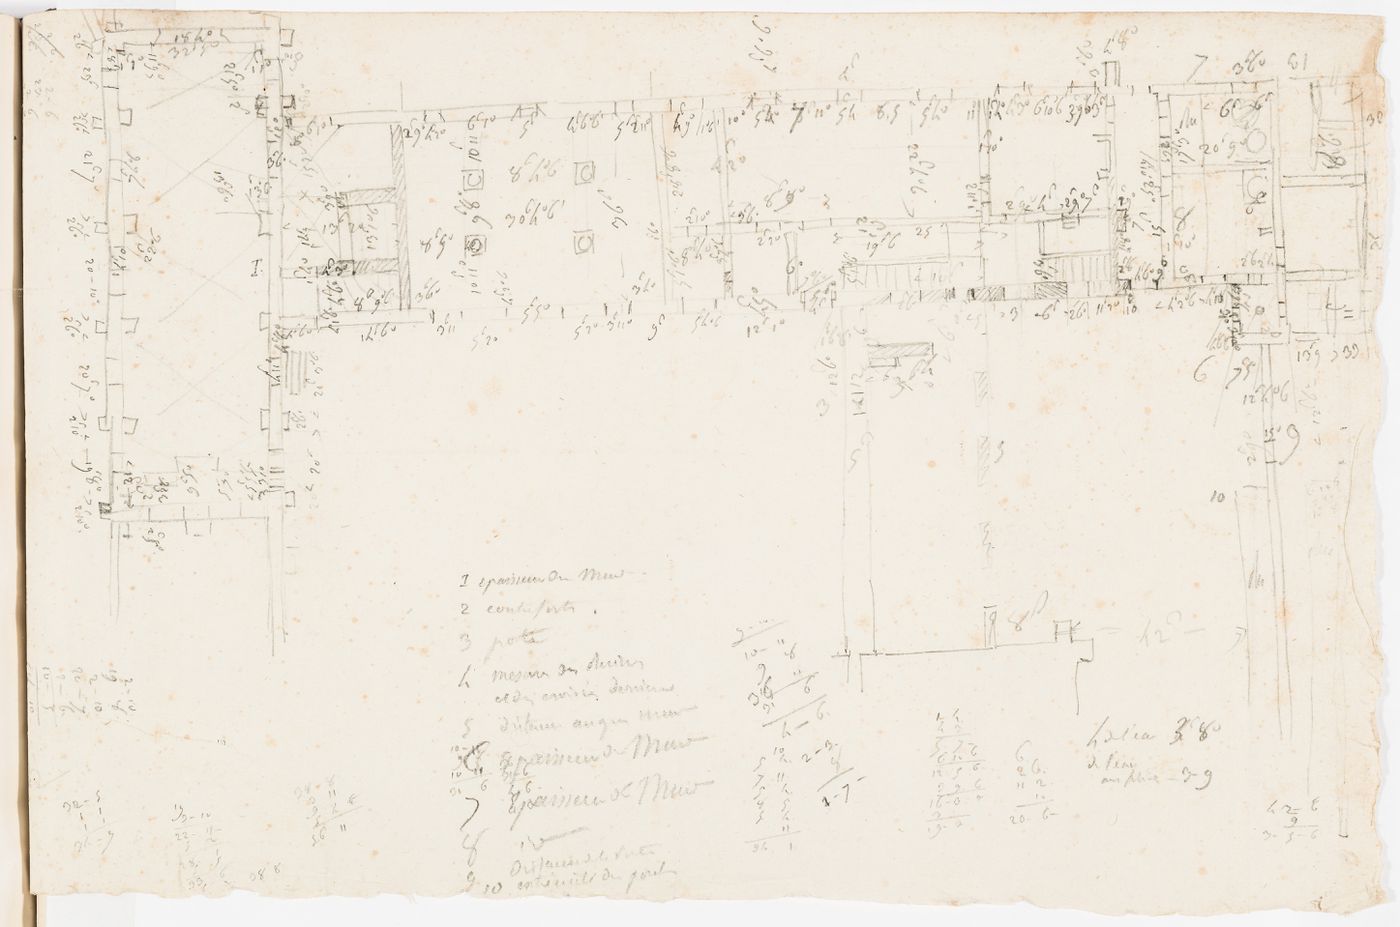 Sketch plan and dimensioning of the ground floor of the outbuildings, Domaine de La Vallée